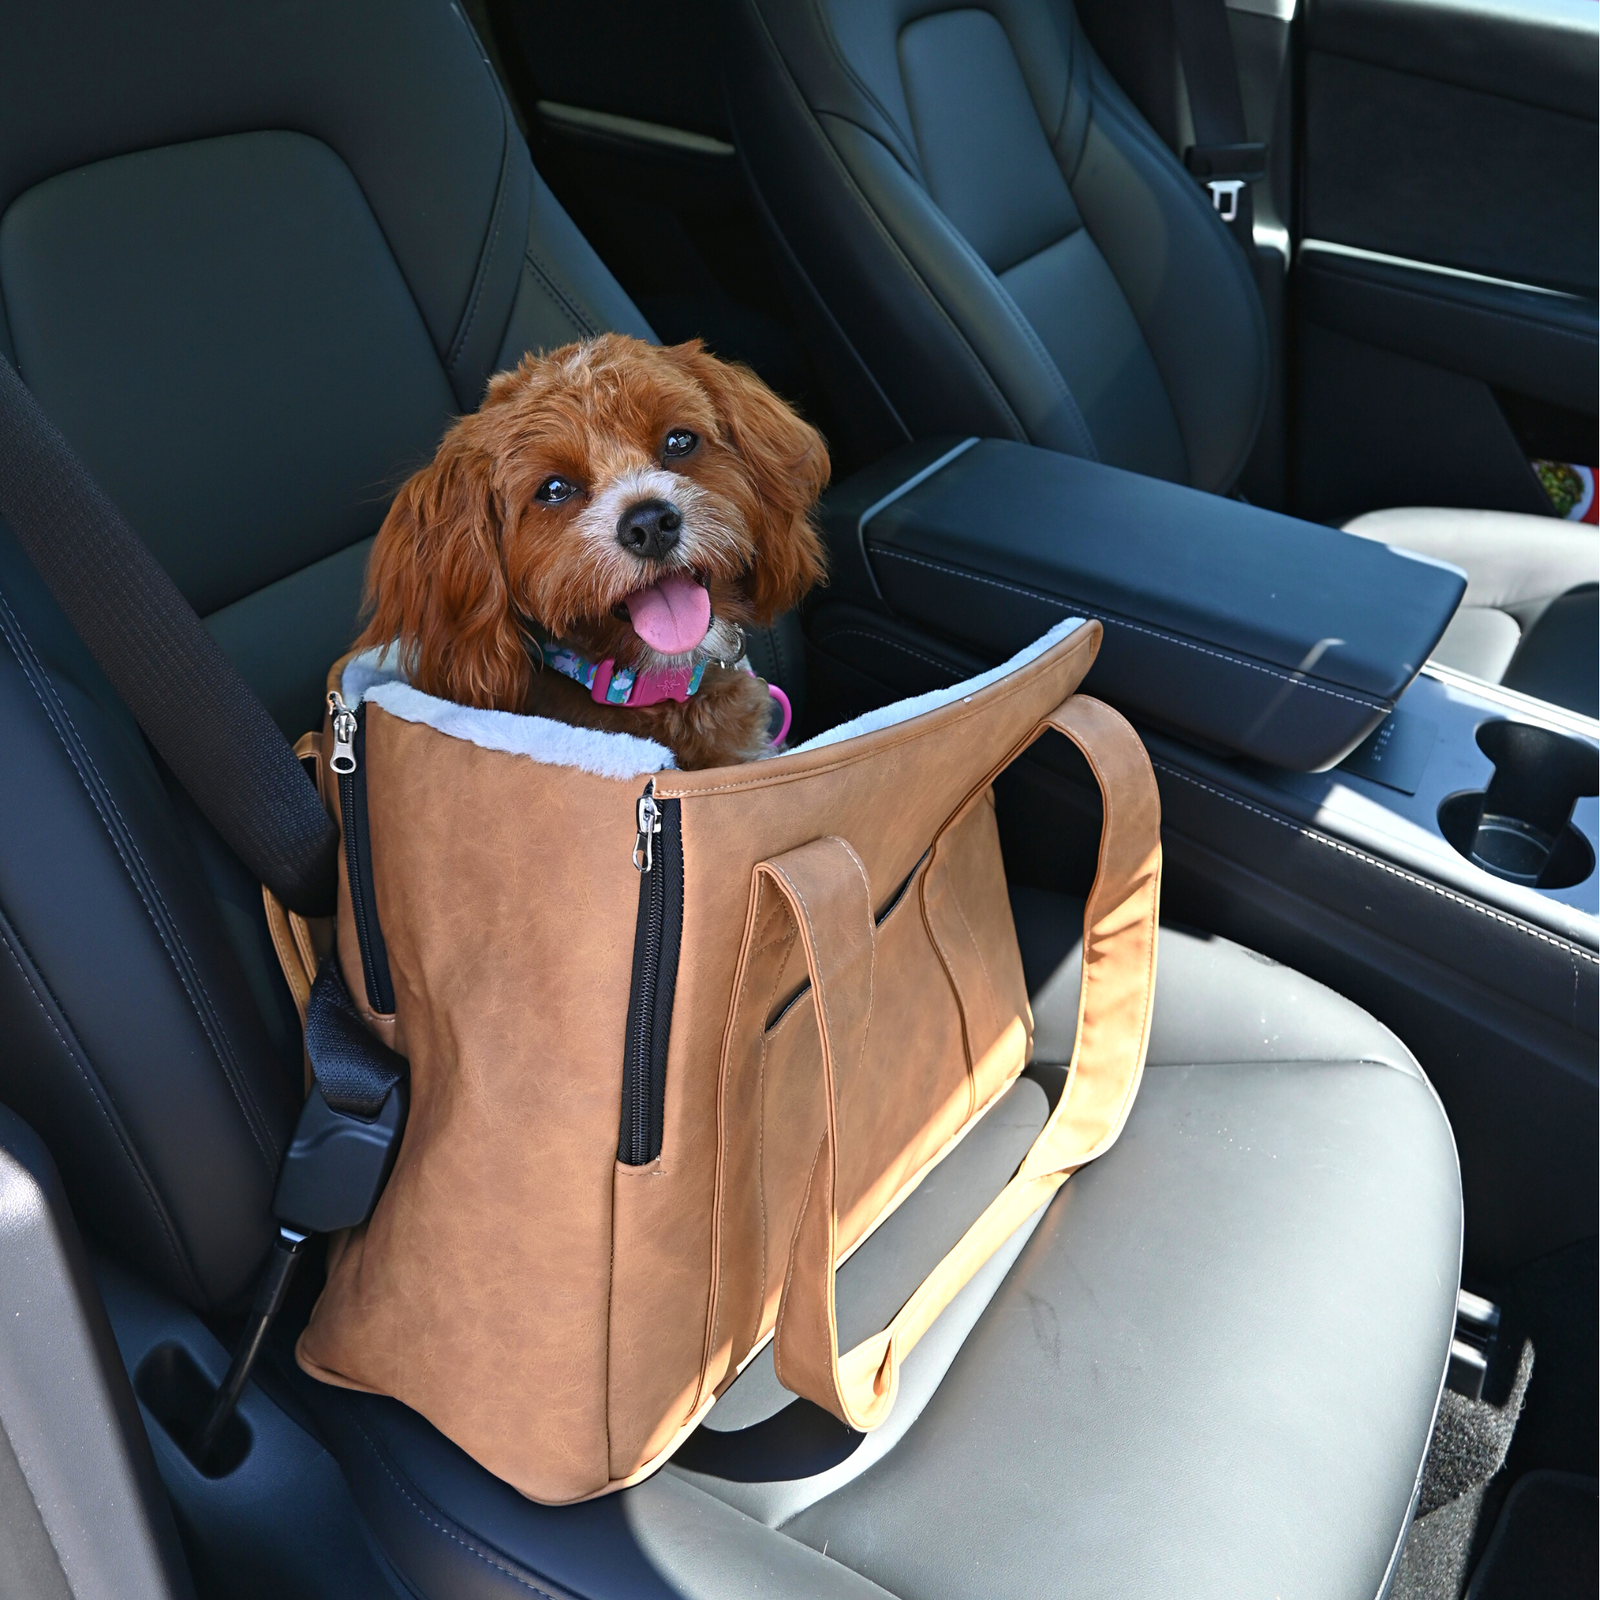 Up To 37% Off on Car Seat Cover Truck Seat Cov